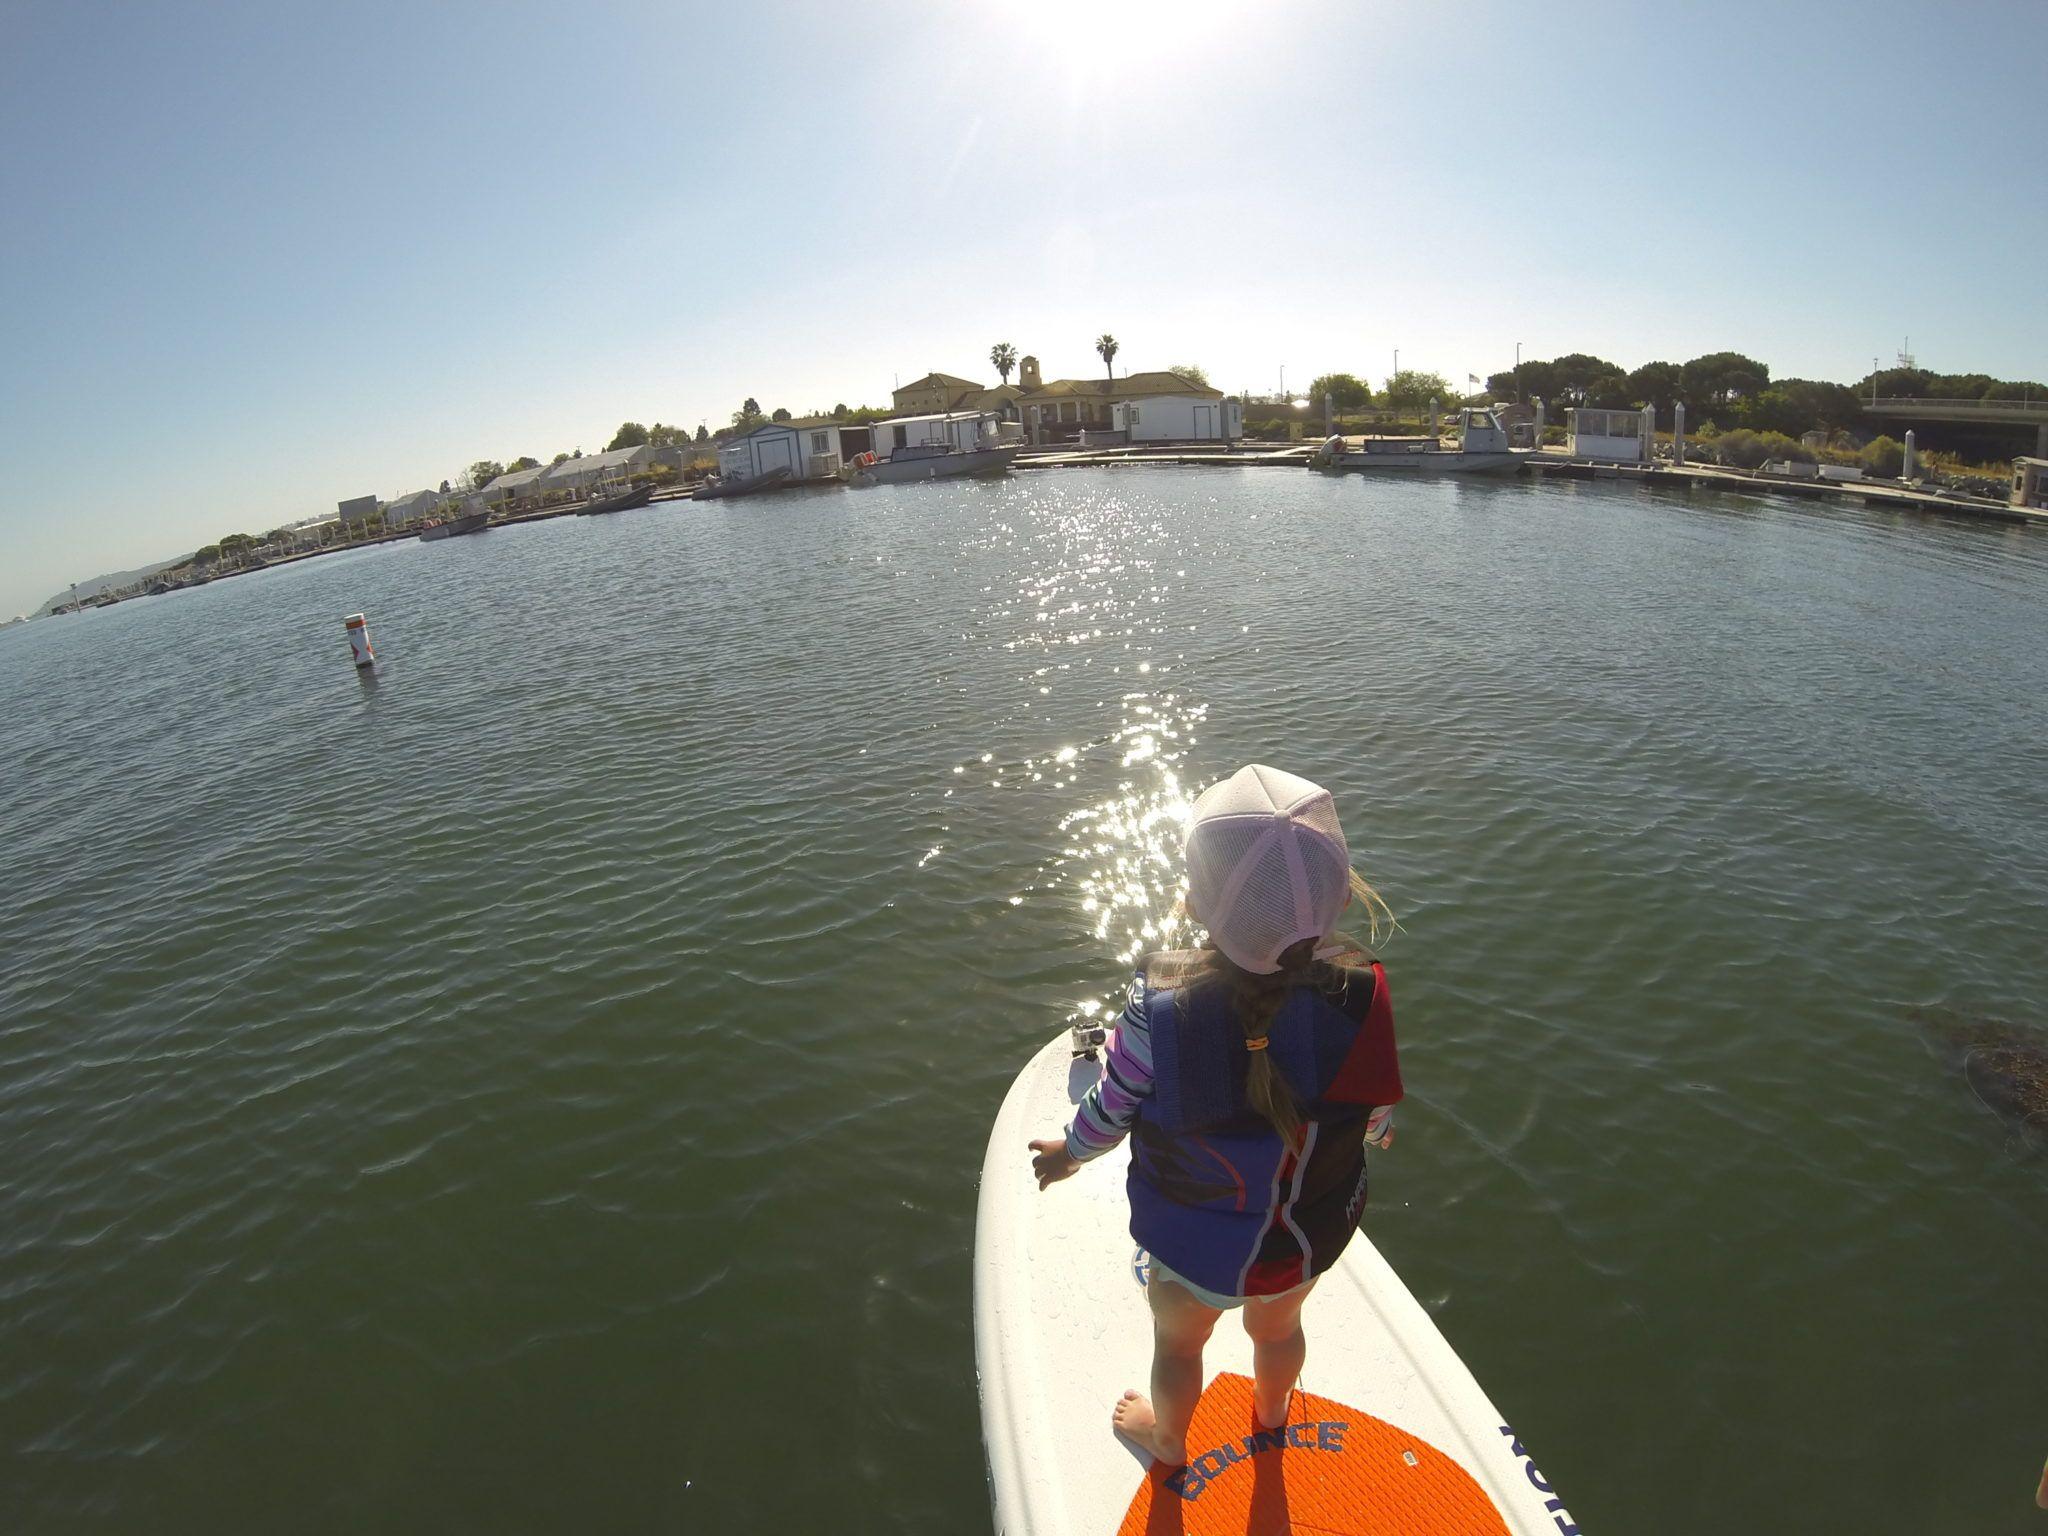 Kids Interested in SUP. The SUP Connection San Diego Rentals